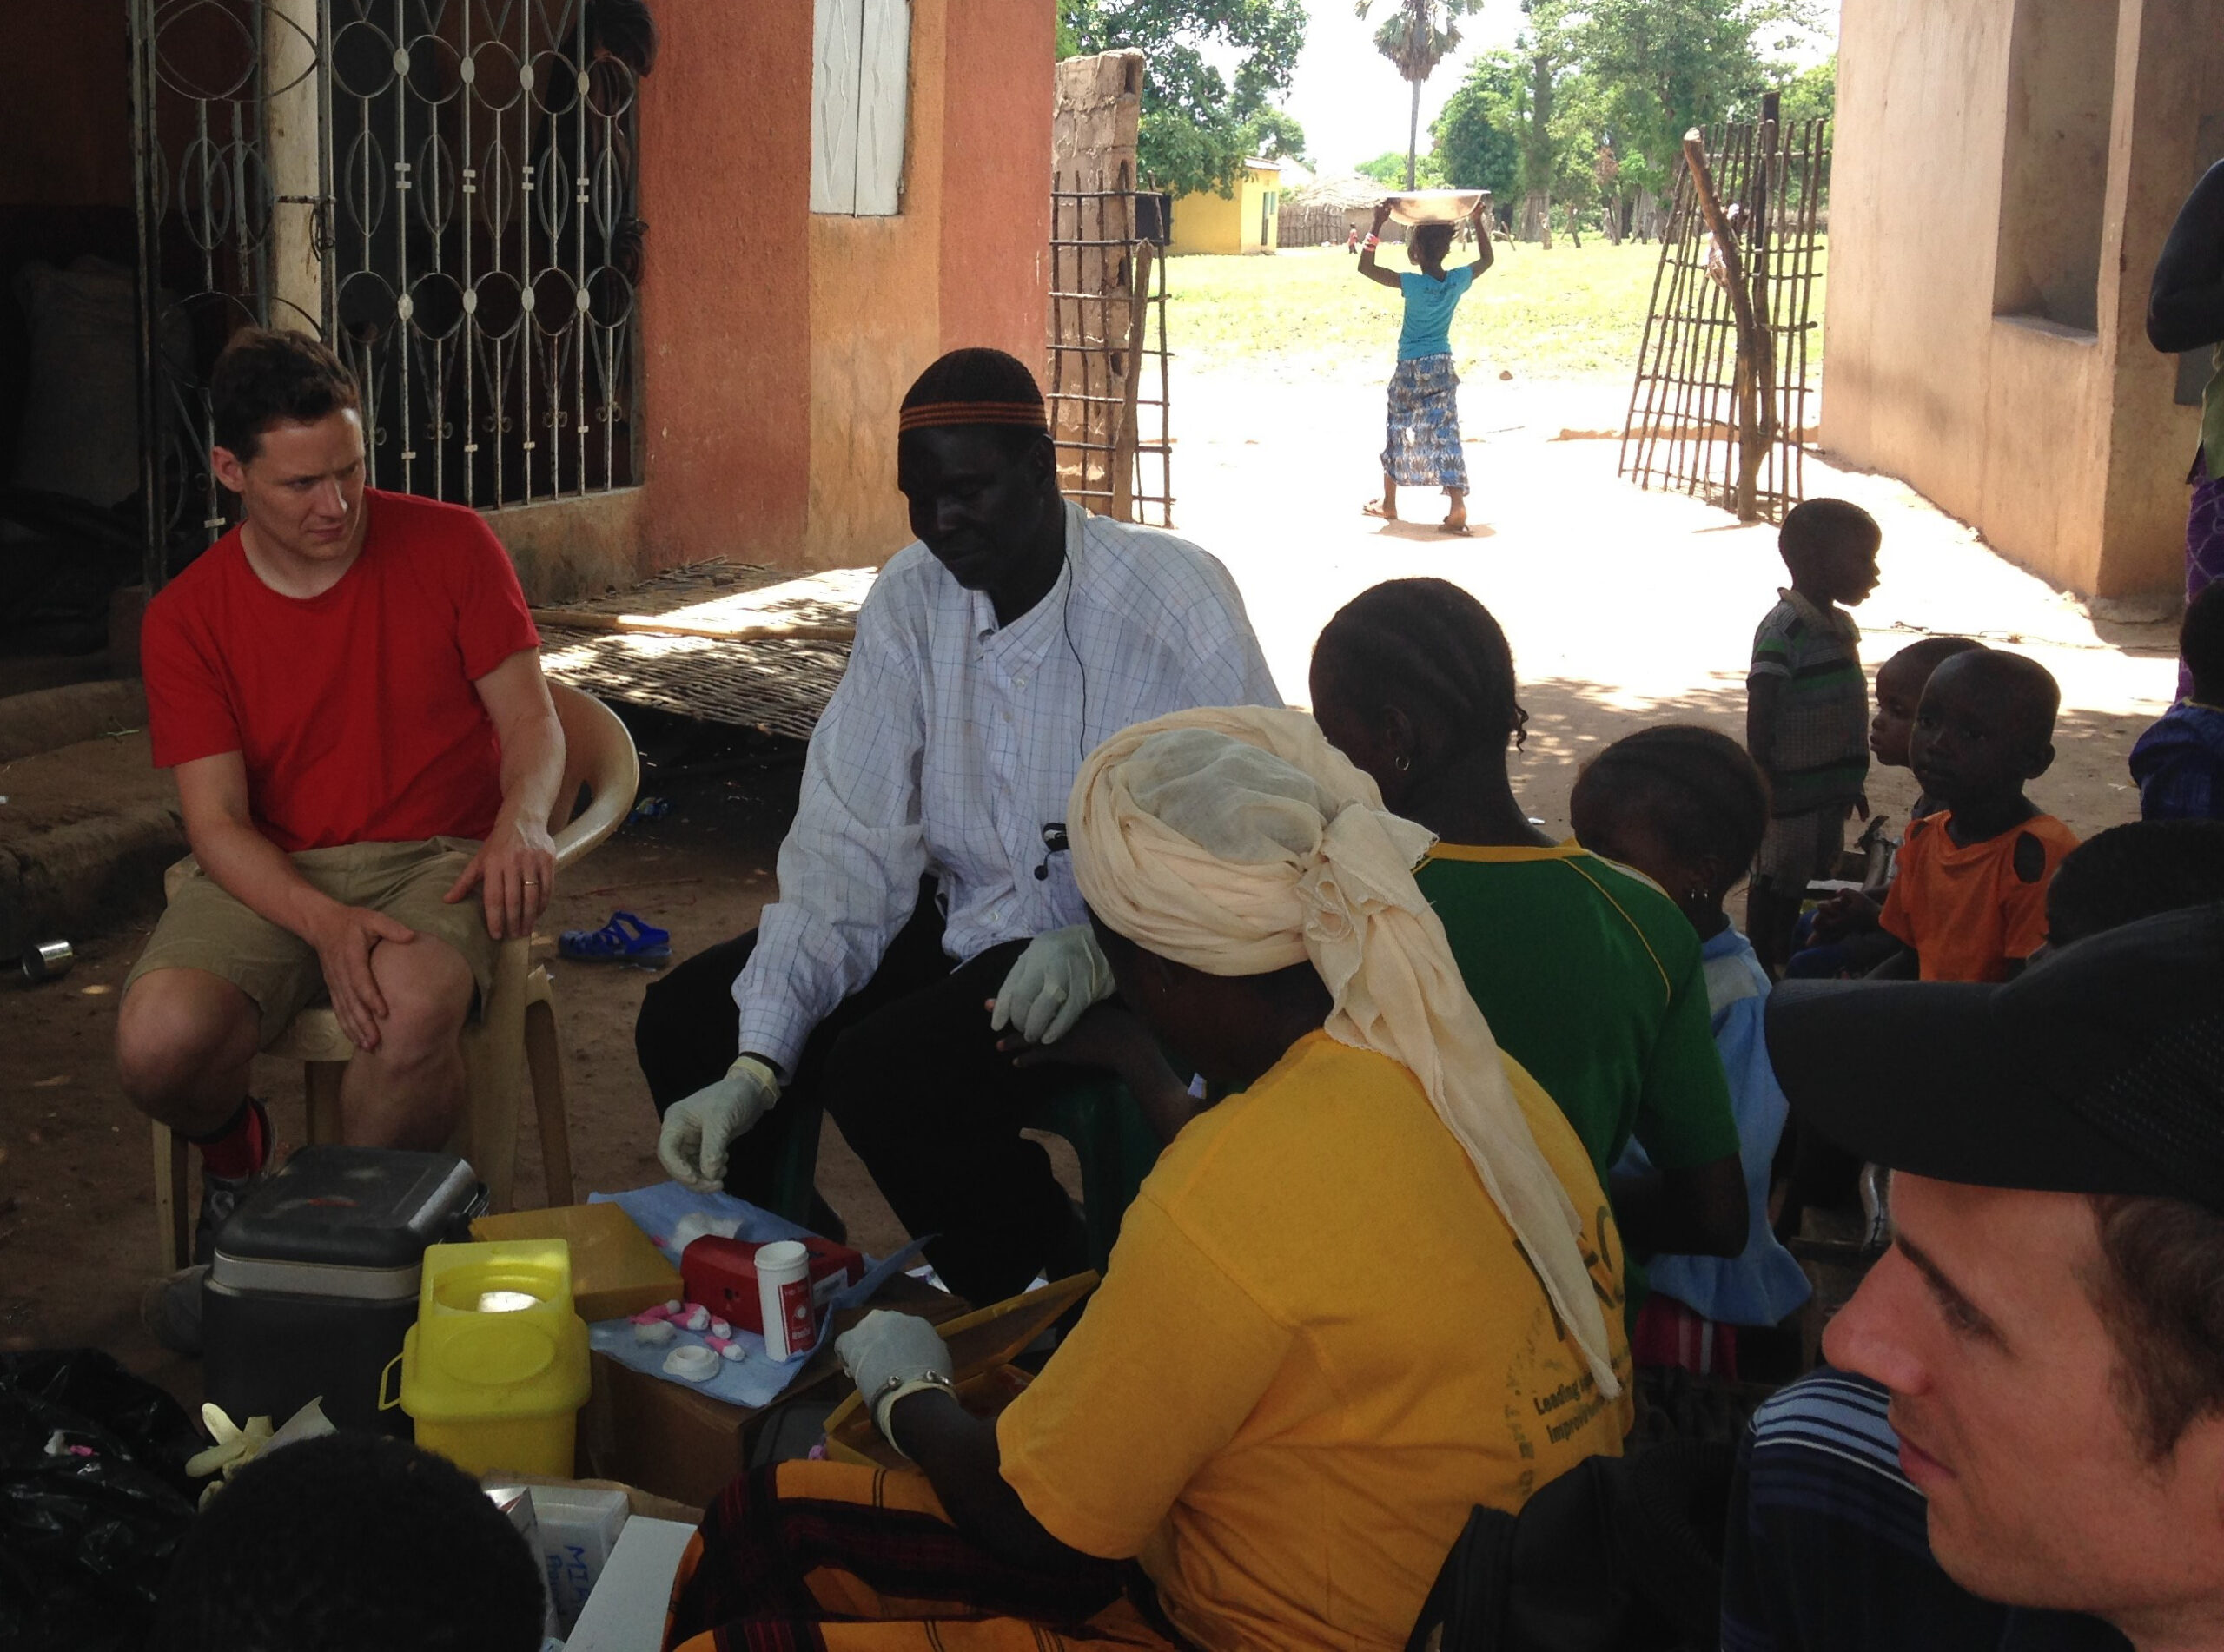 Testing malaria infections: blood sample collections in a village near Basse, The Gambia. Photo credit: Ellen Leffler.